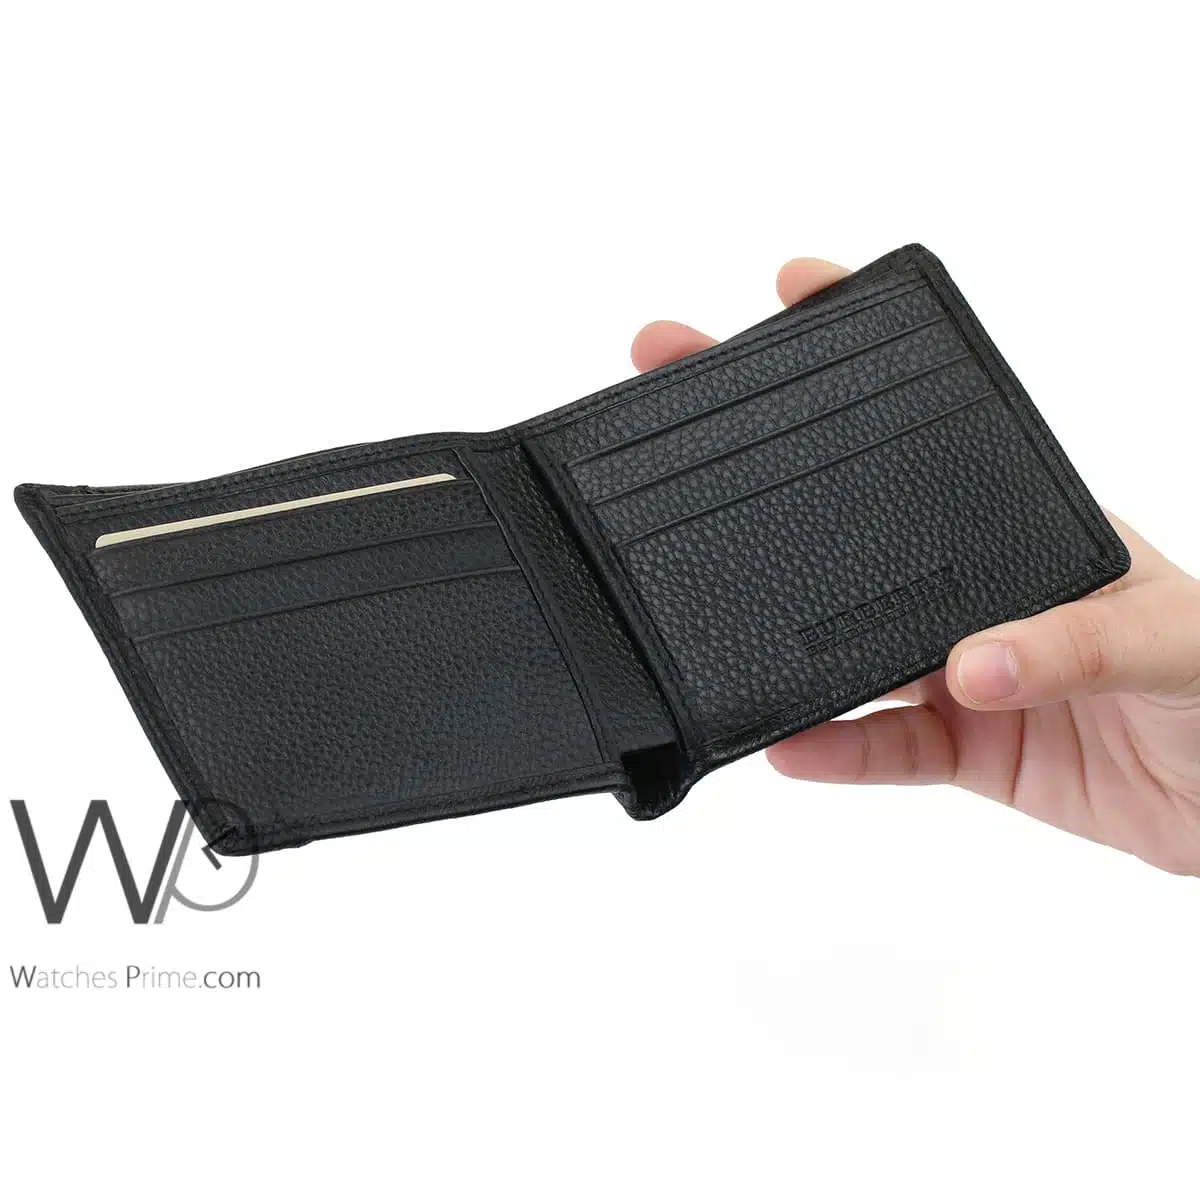 Burberry Wallet Black Leather For Men | Watches Prime